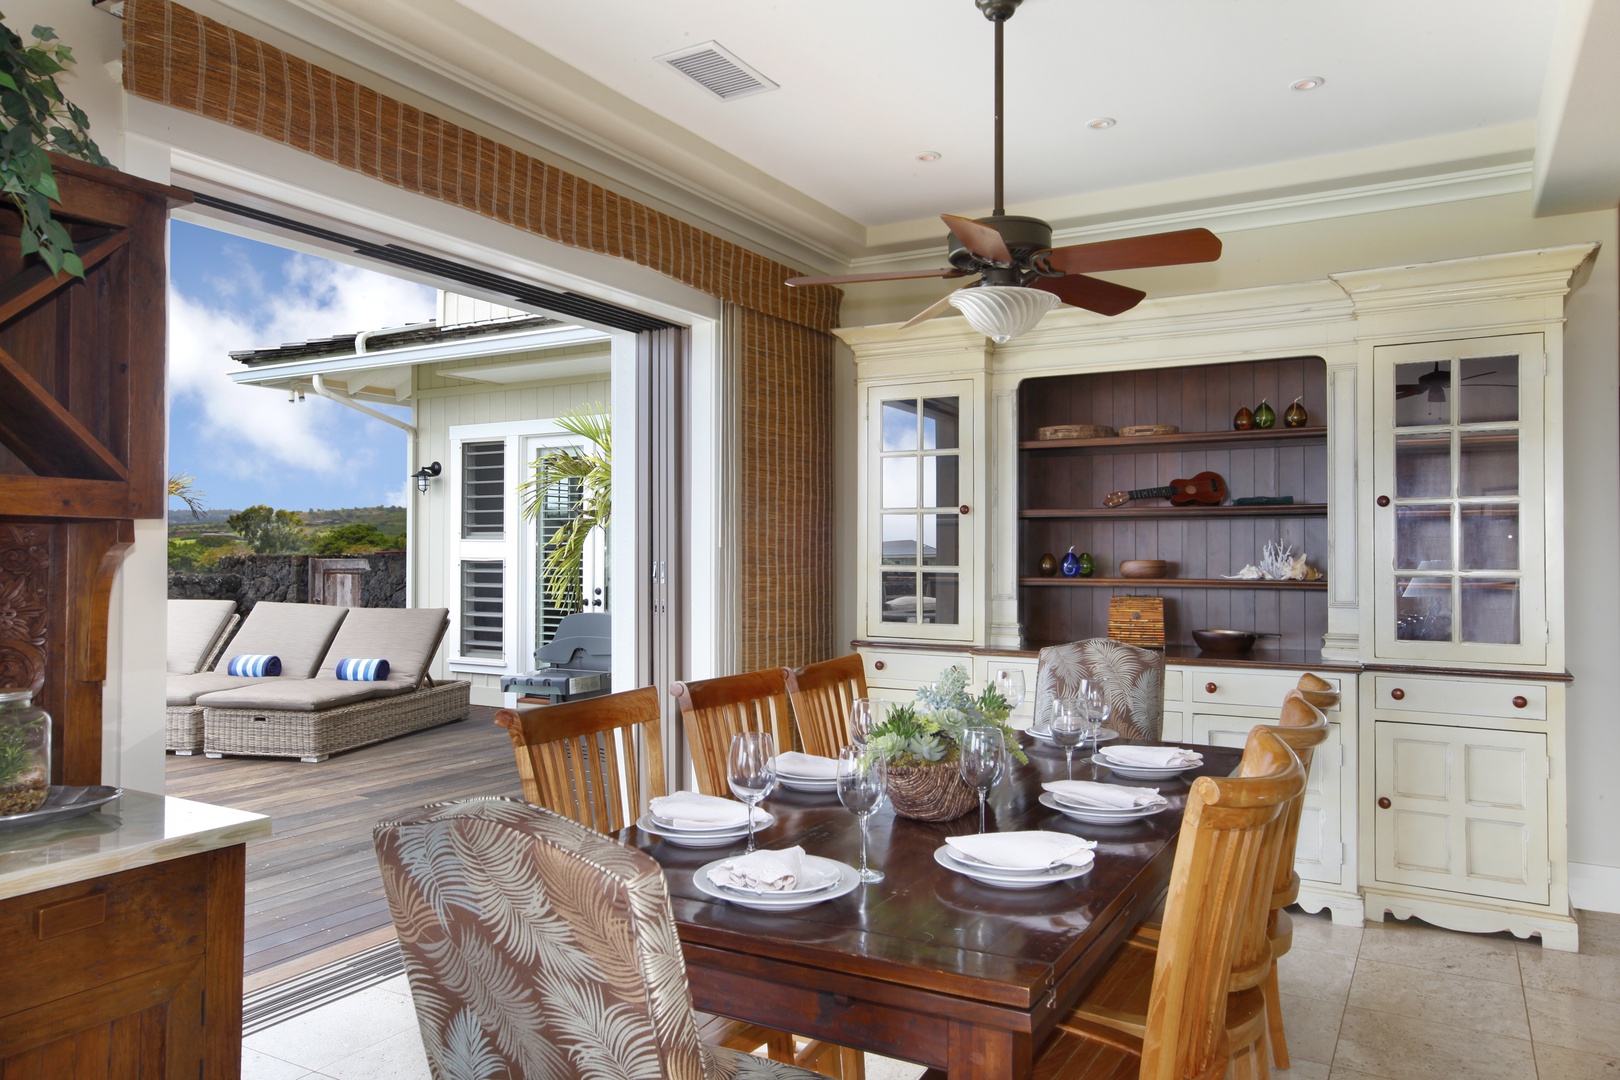 Koloa Vacation Rentals, Hale Luana at Poipu - Dining area with seating for 8